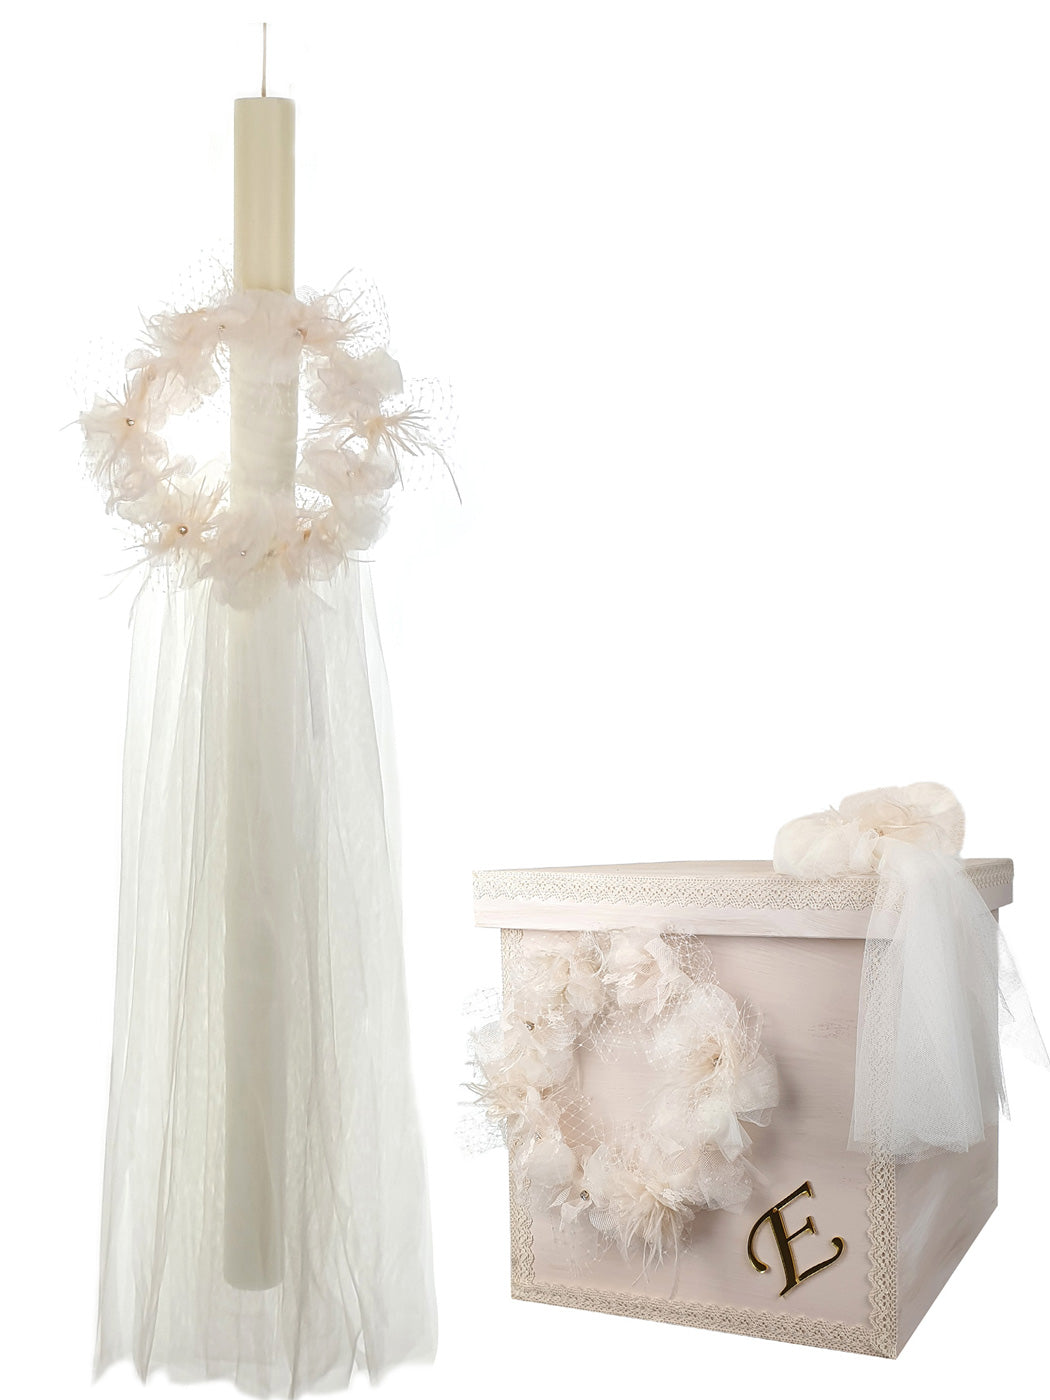 Baptism candle with wreath of flowers - STACY